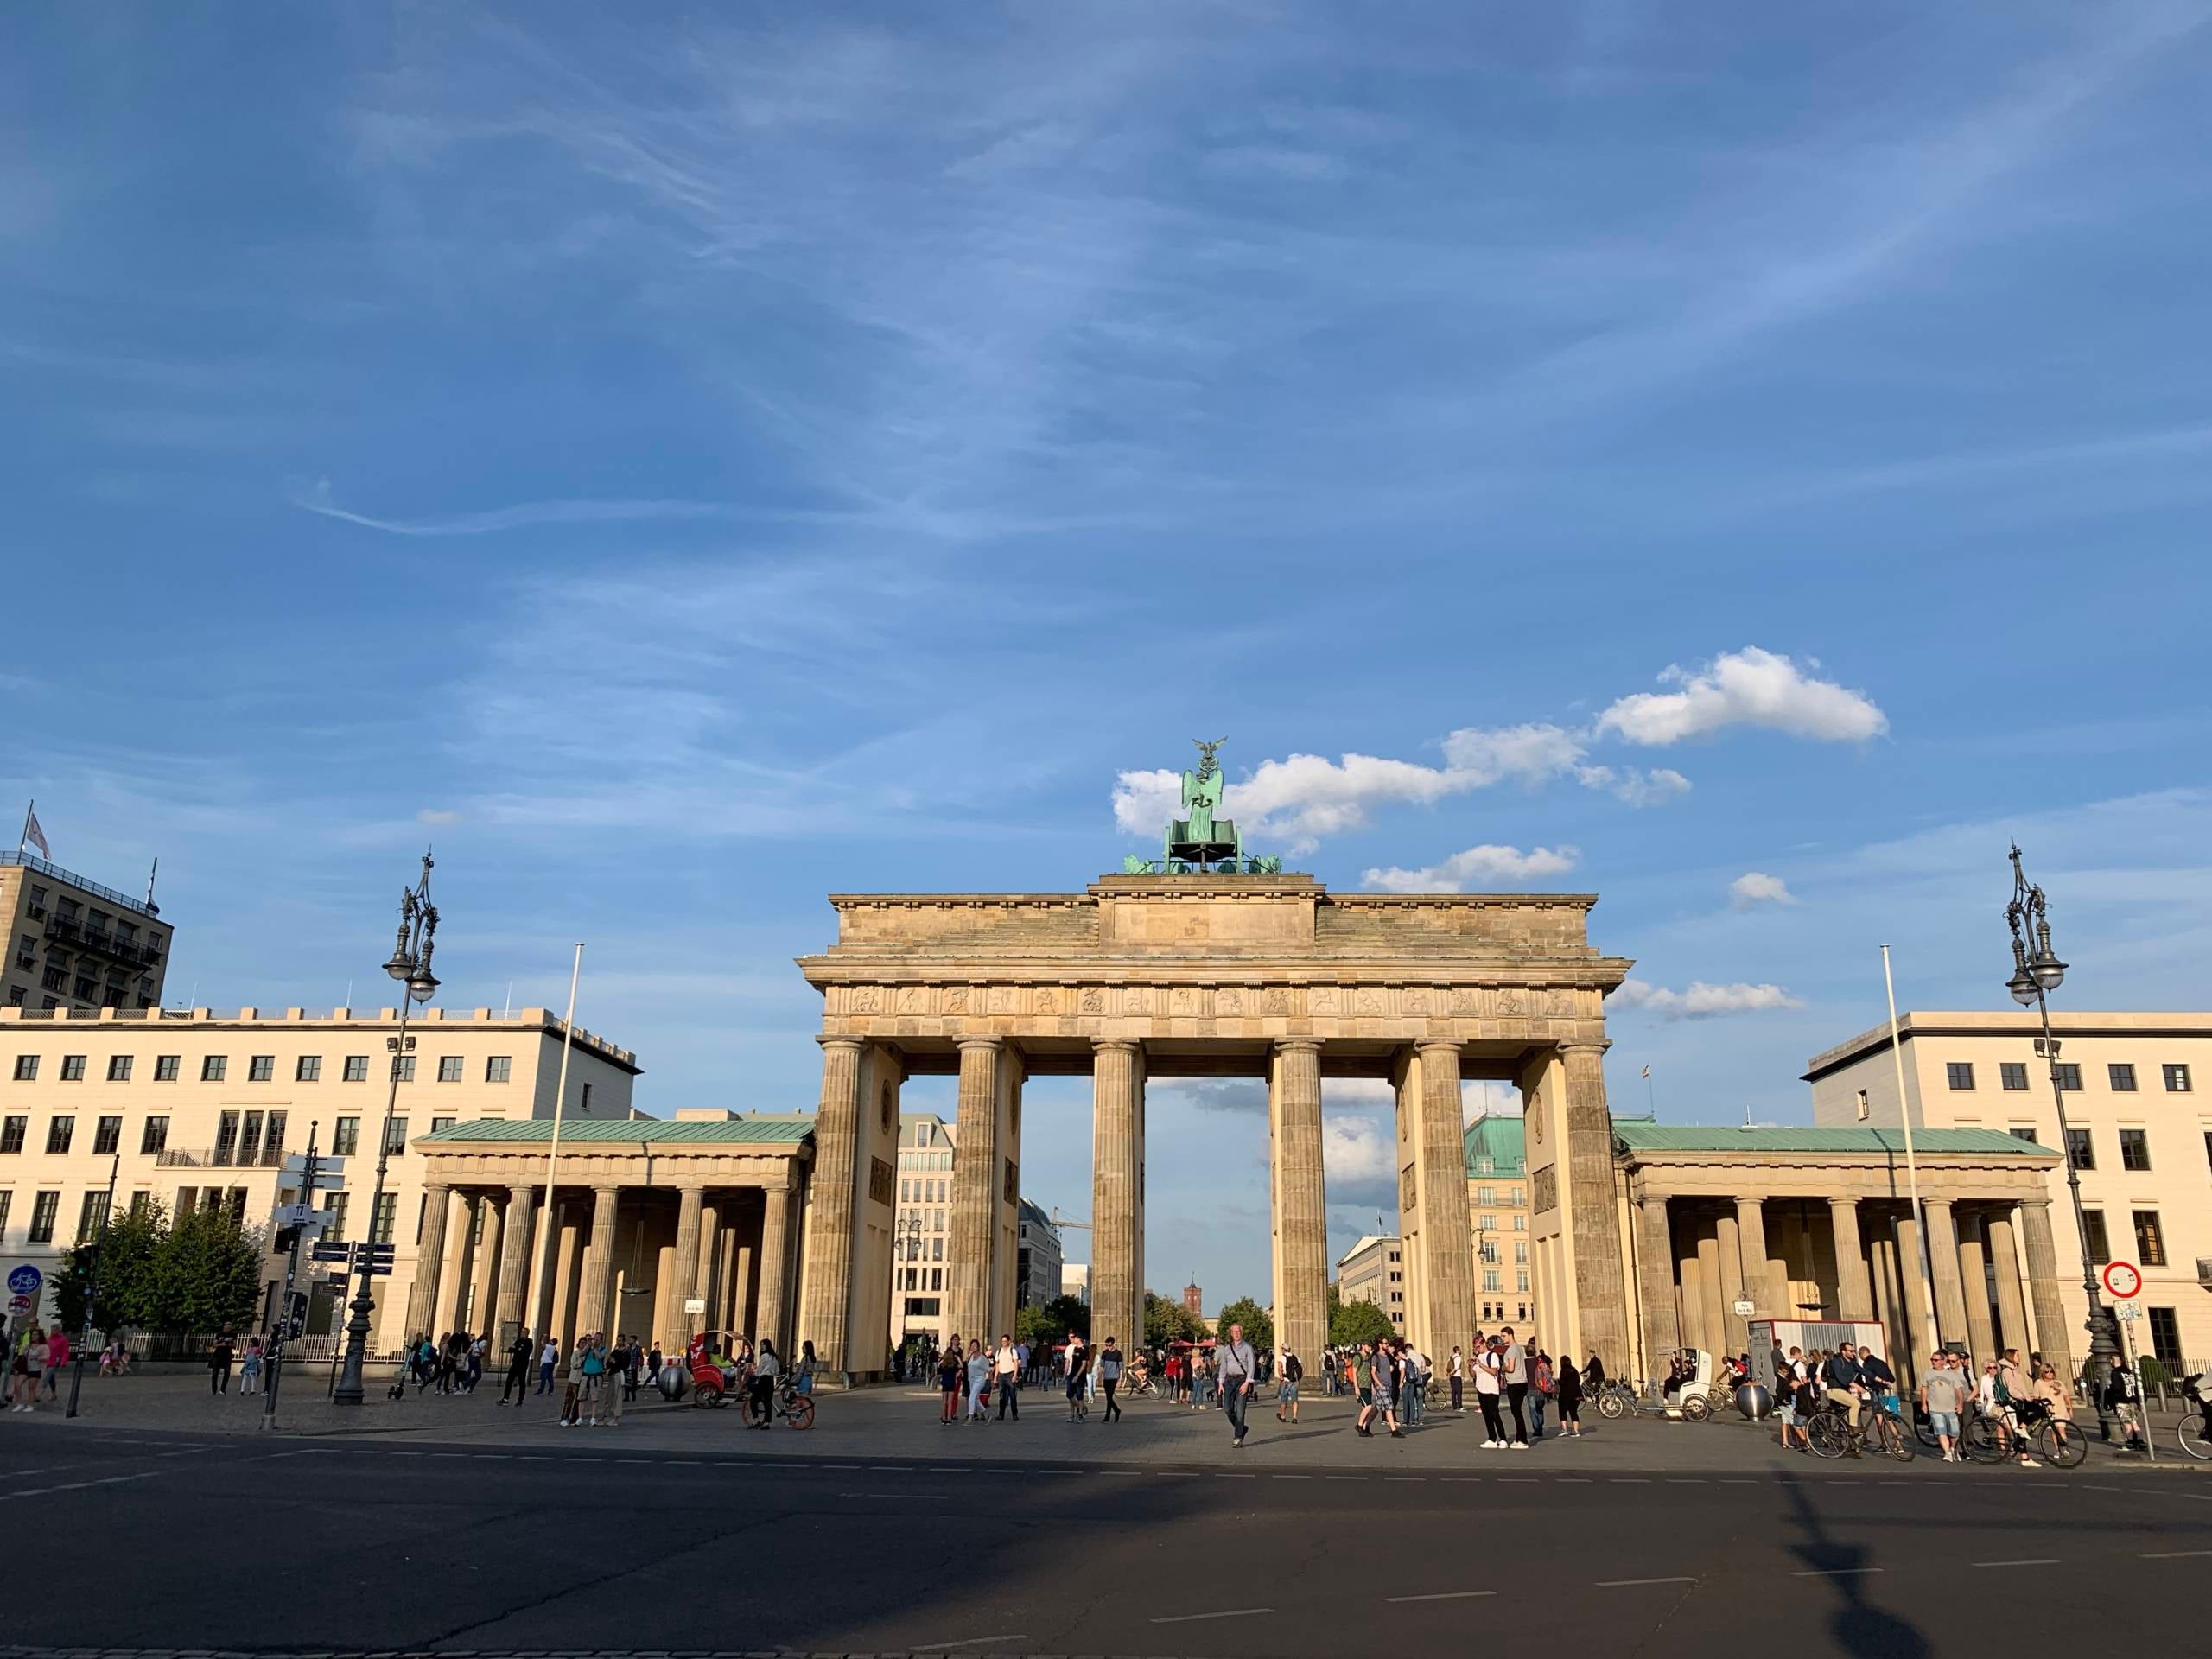 Berlin (Photo by Clint Henderson/The Points Guy)